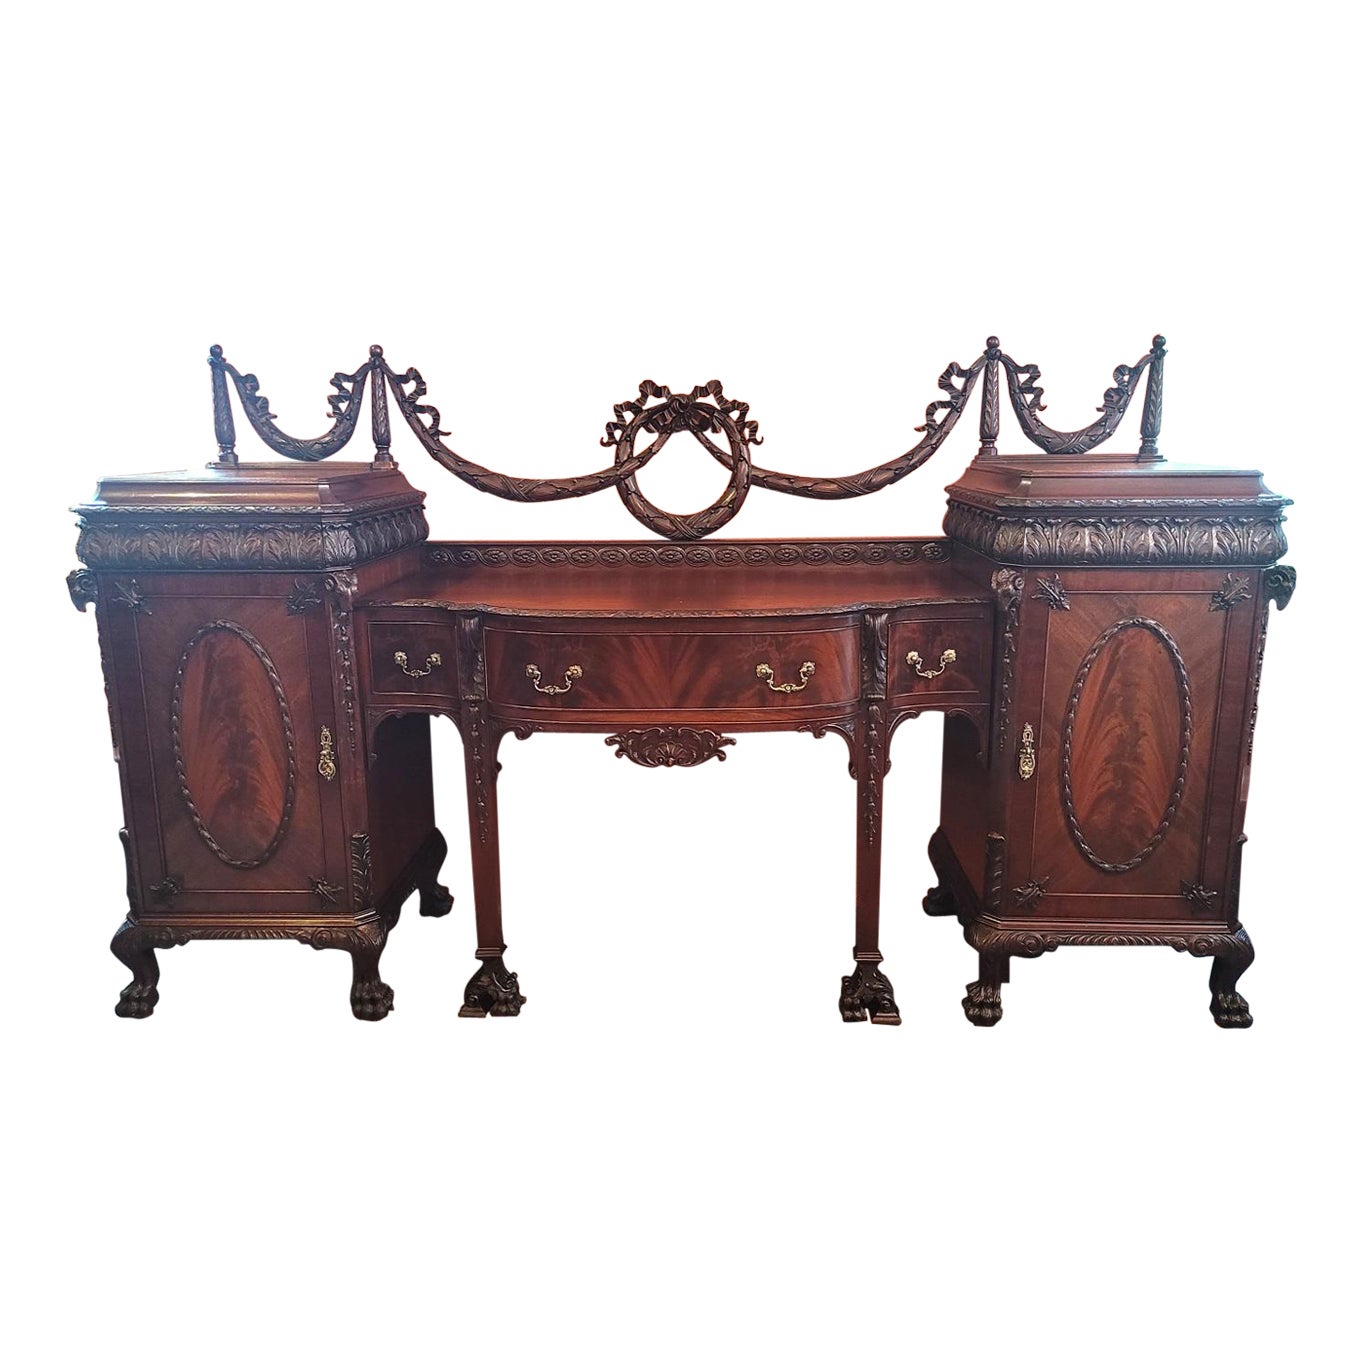 Early 20C Exceptional Chippendale Irish Georgian Style Sideboard by S Hille